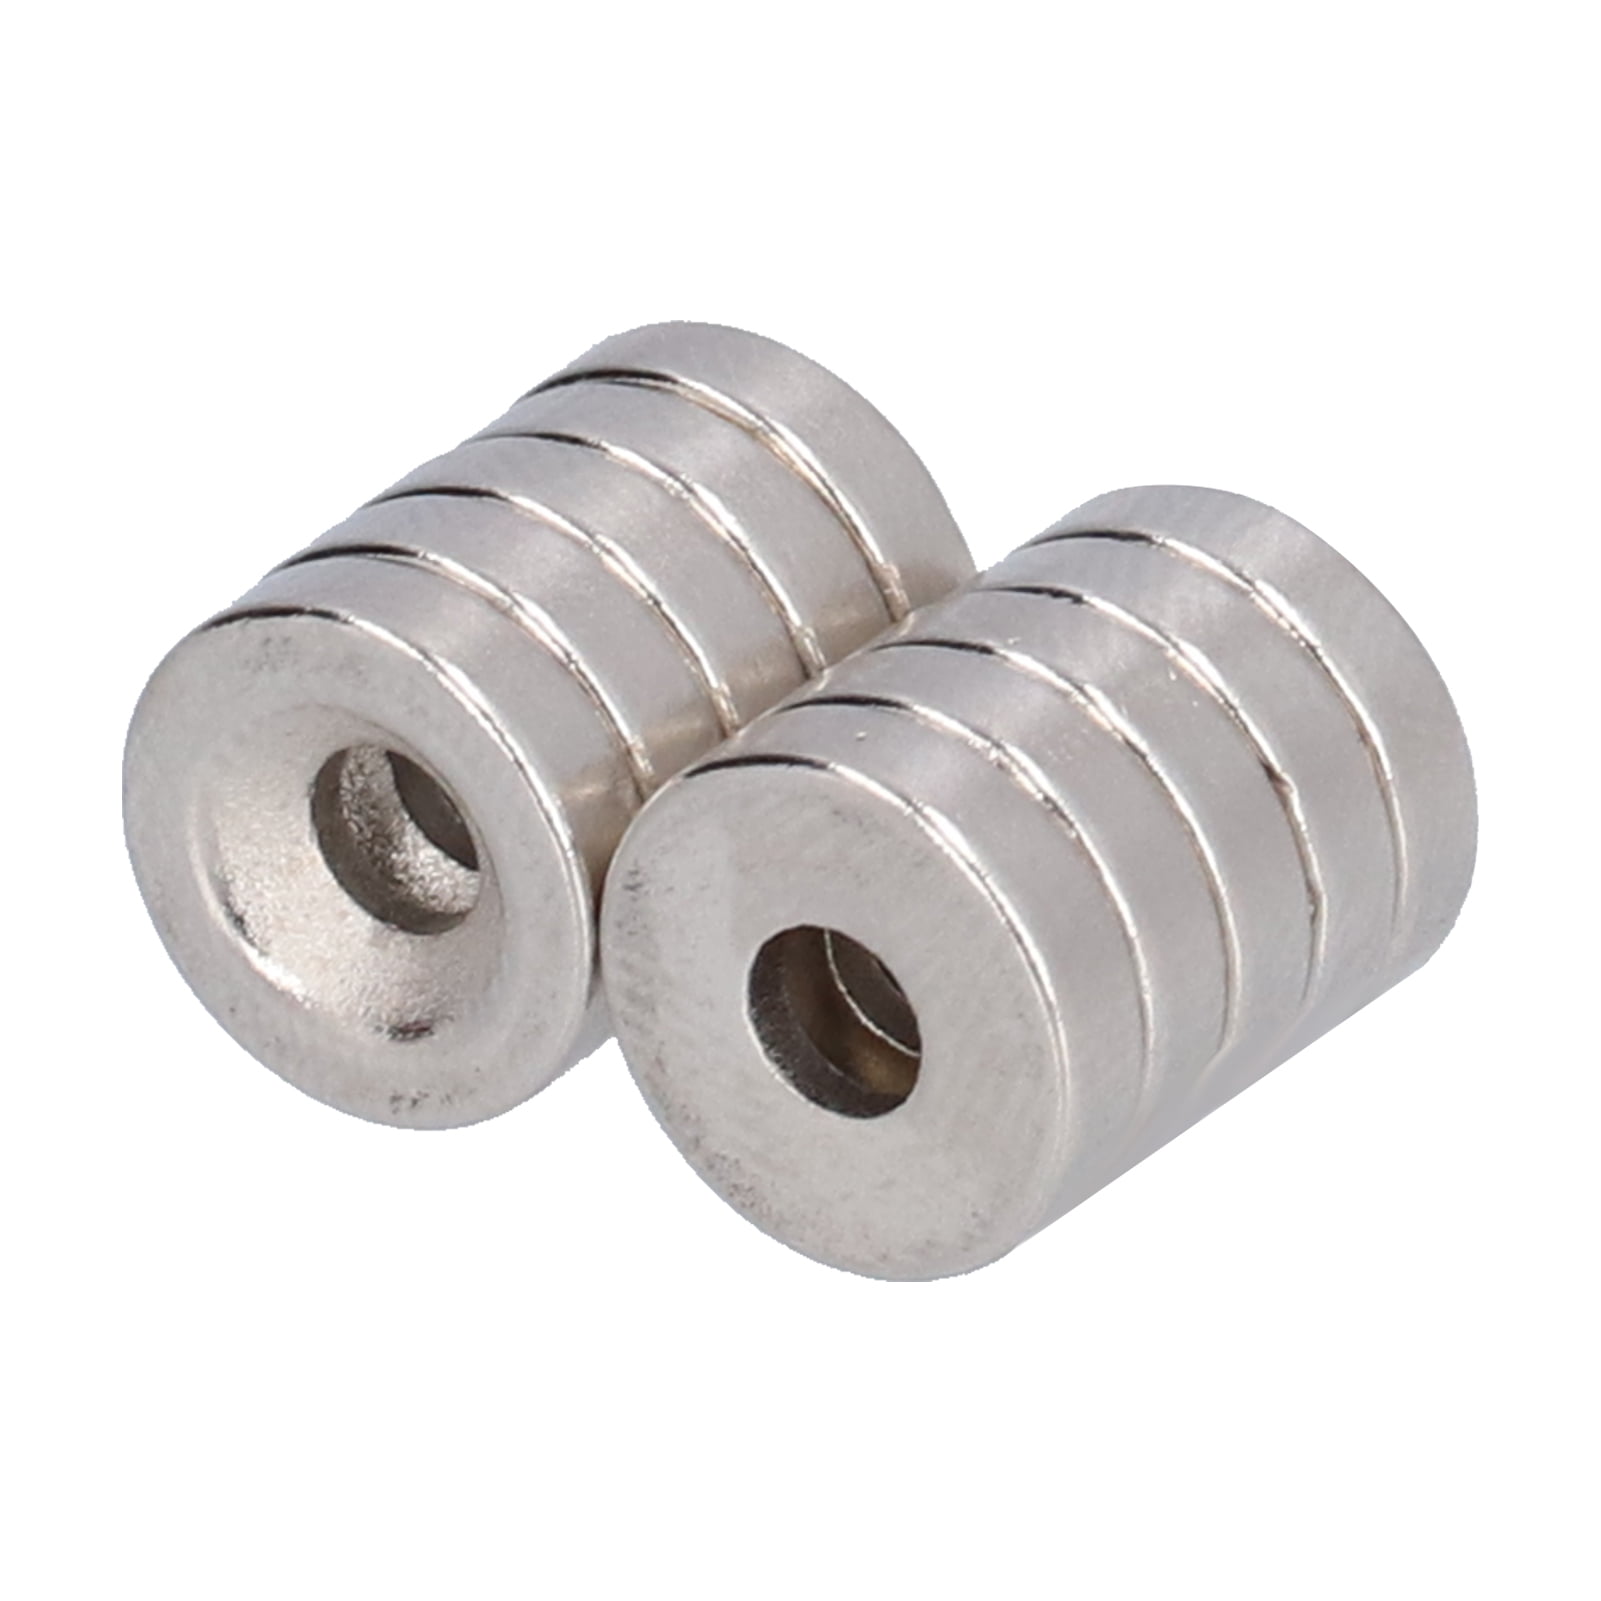 Neodymium Countersunk Ring Magnets 20mm x 3mm x 5mm Hole N42 Strong Disc Screw 